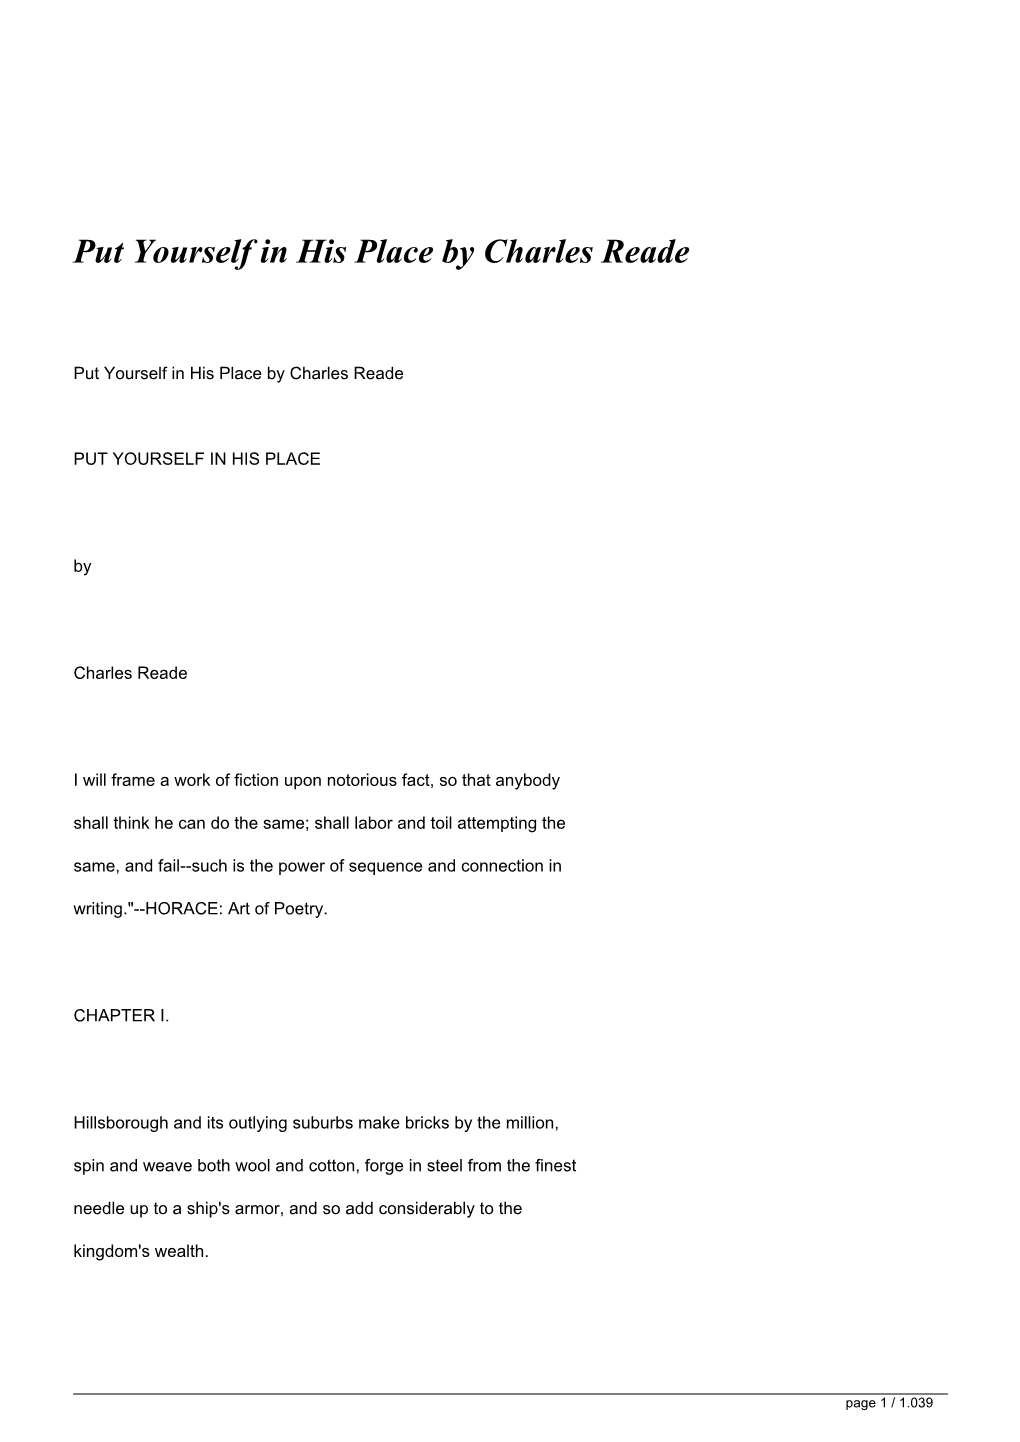 Put Yourself in His Place by Charles Reade&lt;/H1&gt;